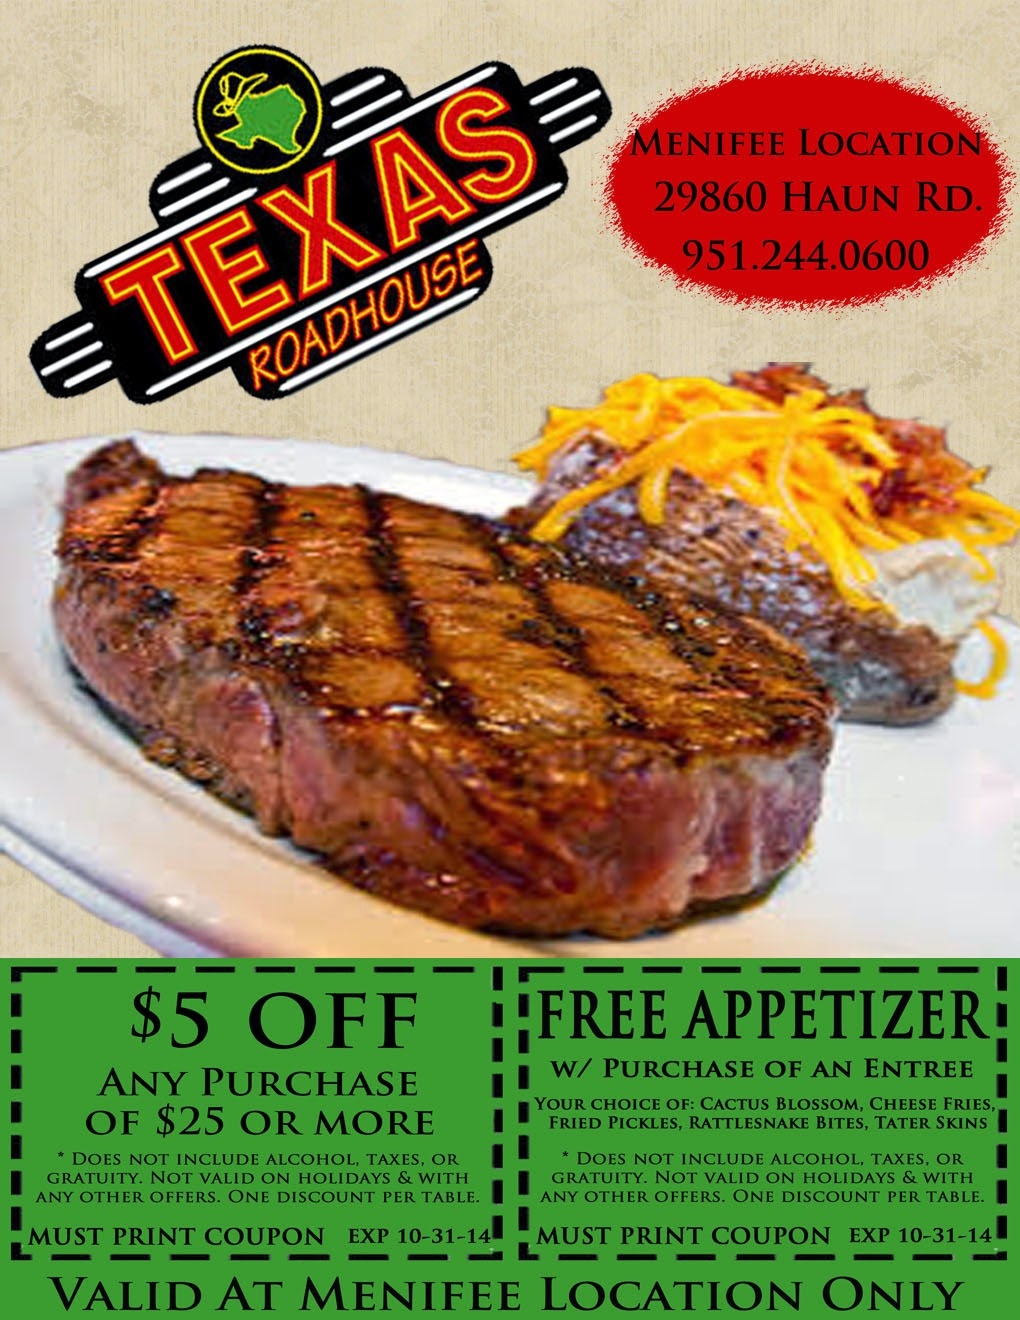 Zumiez Coupons Printable 2018 : Harcourt Outlines Coupons - Texas Roadhouse Free Appetizer Printable Coupon 2015